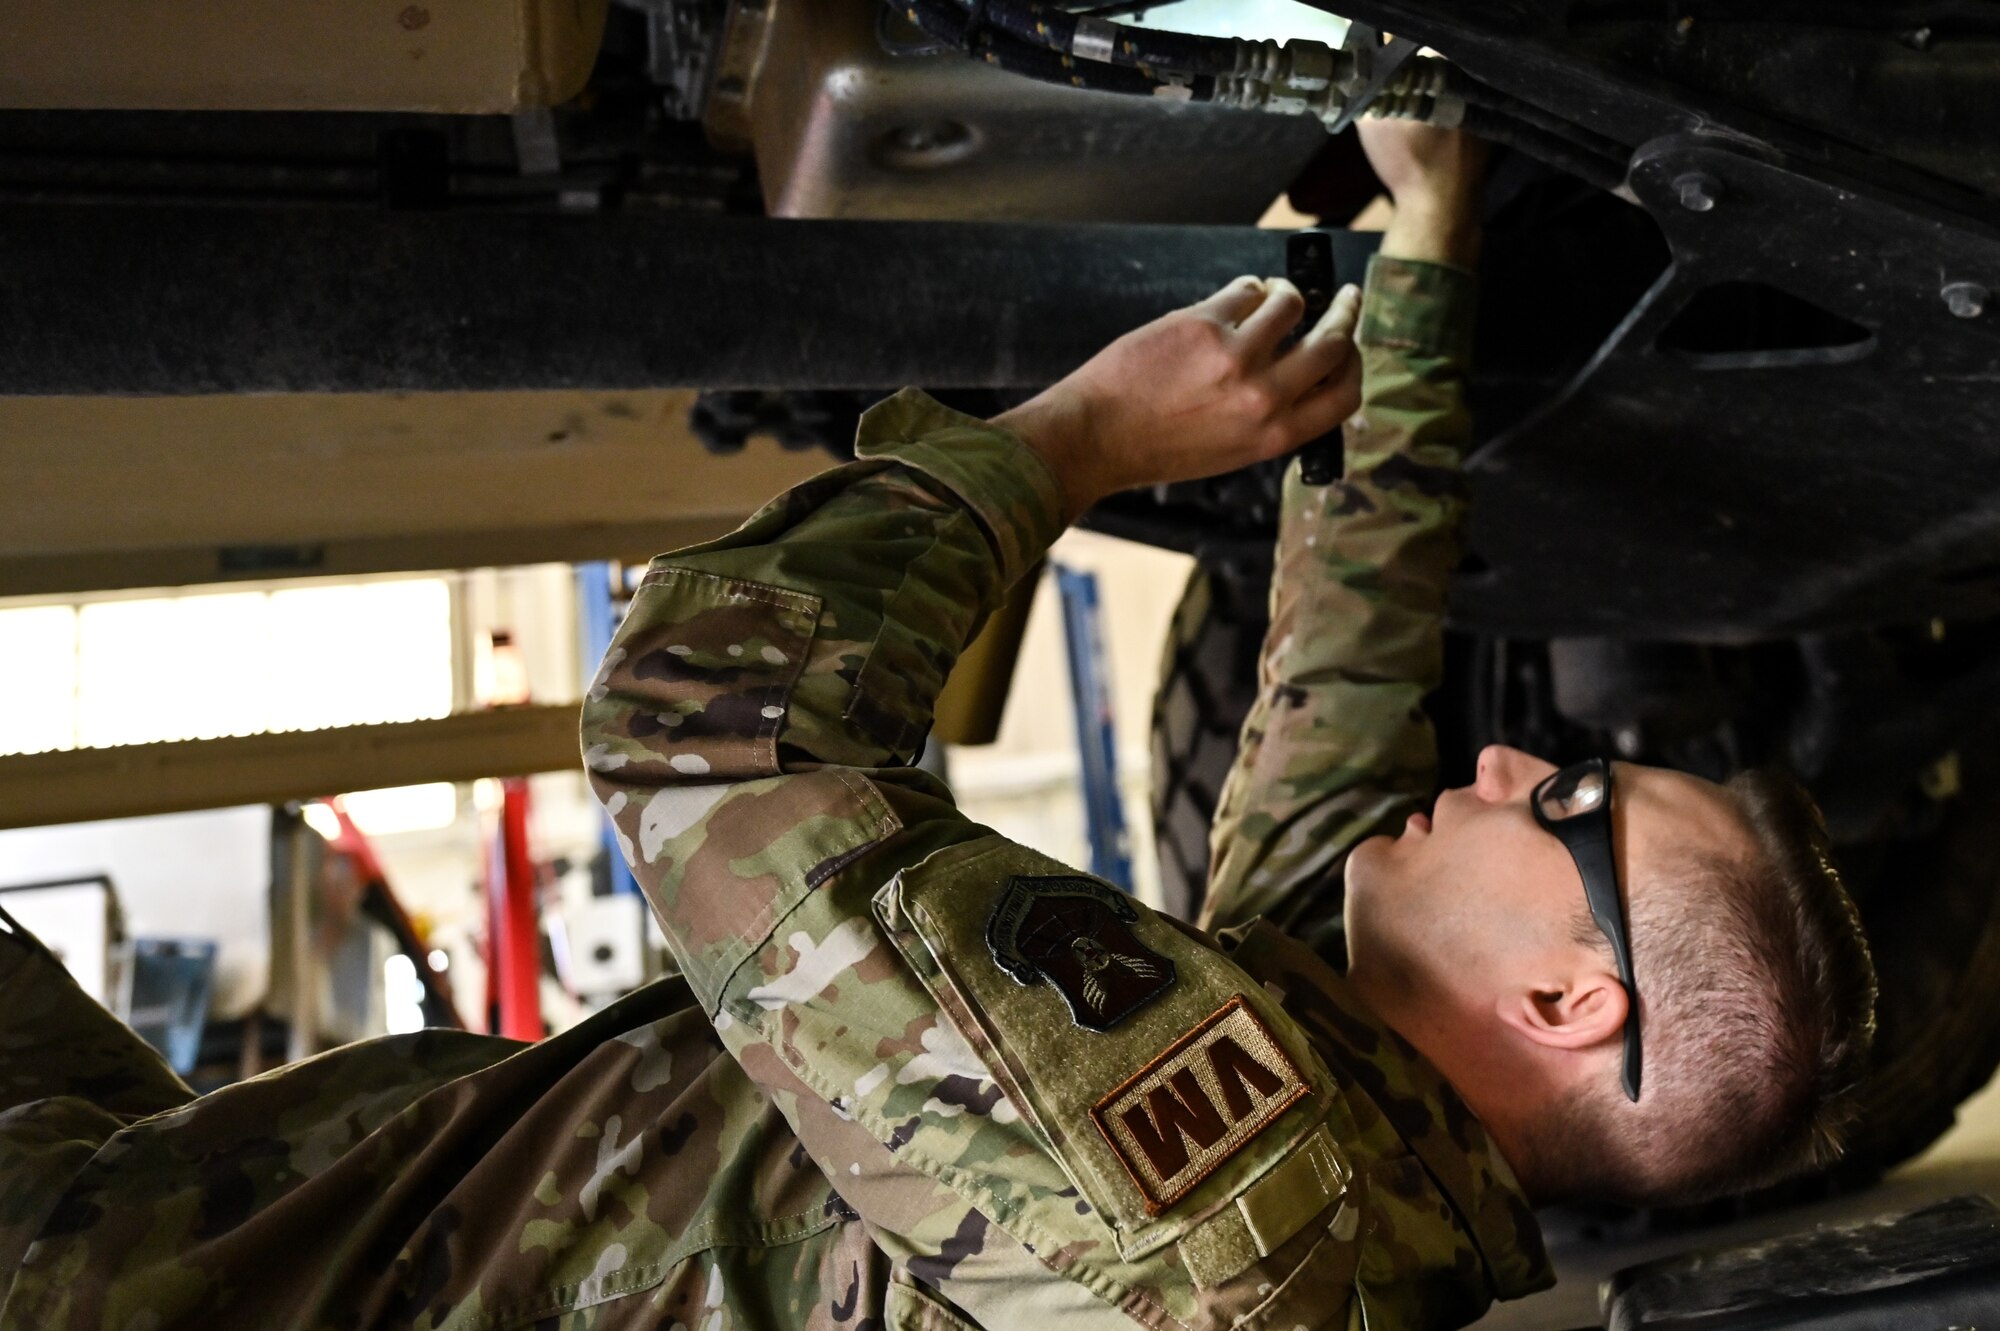 Senior Airman Korey Sarantopoulos, 90th Logistics Readiness Squadron vehicle maintenance journeyman, inspects the undercarriage to check the electrical, brake, fuel, cooling and other systems for serviceability as part of a Joint Light Tactical Vehicle limited technical inspection at F.E. Warren Air Force Base, Wyoming, Oct 25, 2022. The 90 LRS is tasked with preparing the next generation of security forces vehicles sent to protect the 90th Missile Wing's ICBM system as part of Air Force Global Strike Command’s priority to modernize. (U.S. Air Force photo by Joseph Coslett)